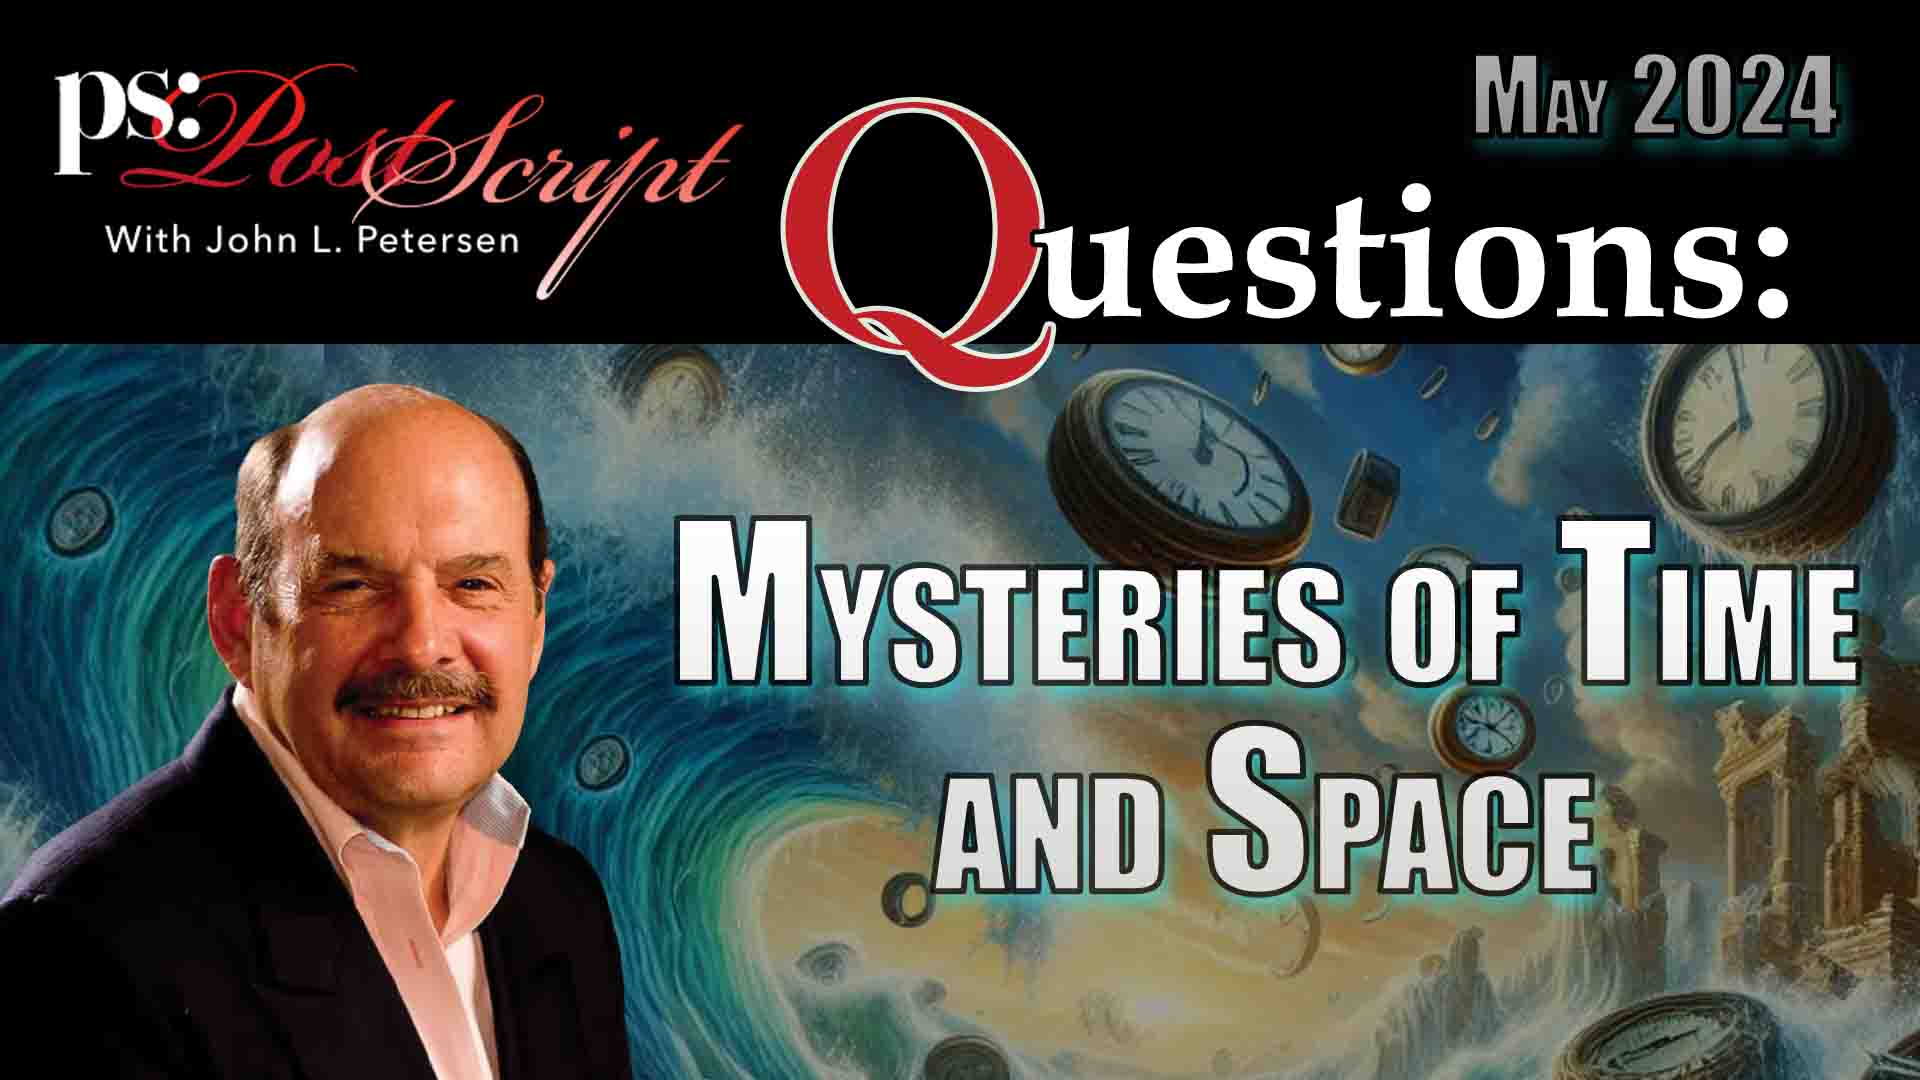 The Mysteries of Time, Space, and the Human Experience